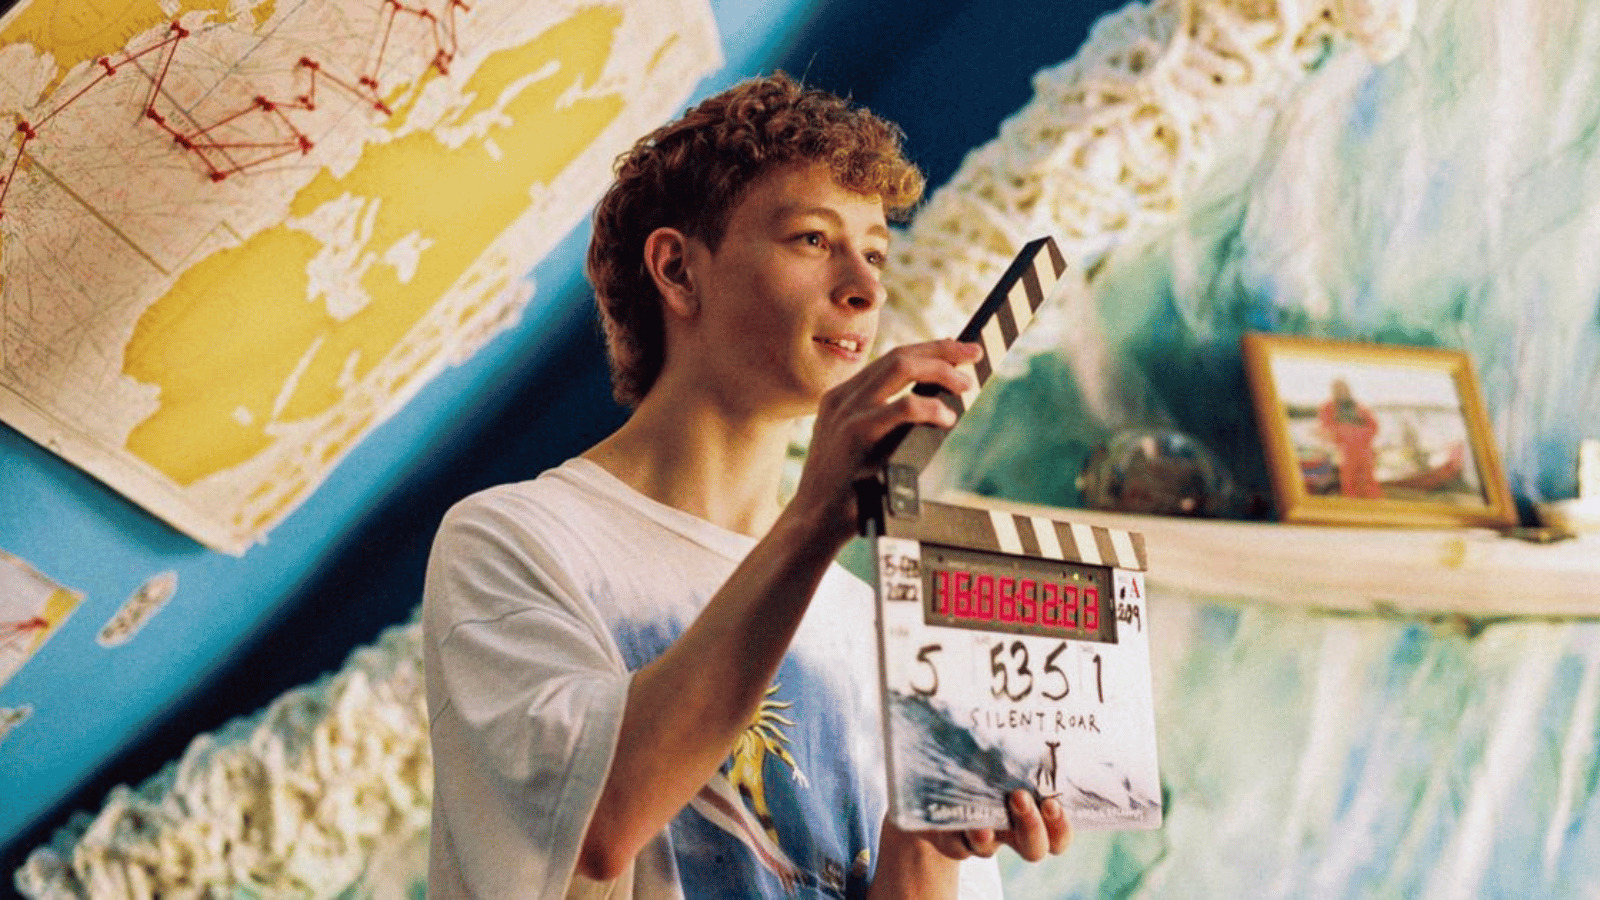 An actor on the set of Silent Roar holding a clapper board